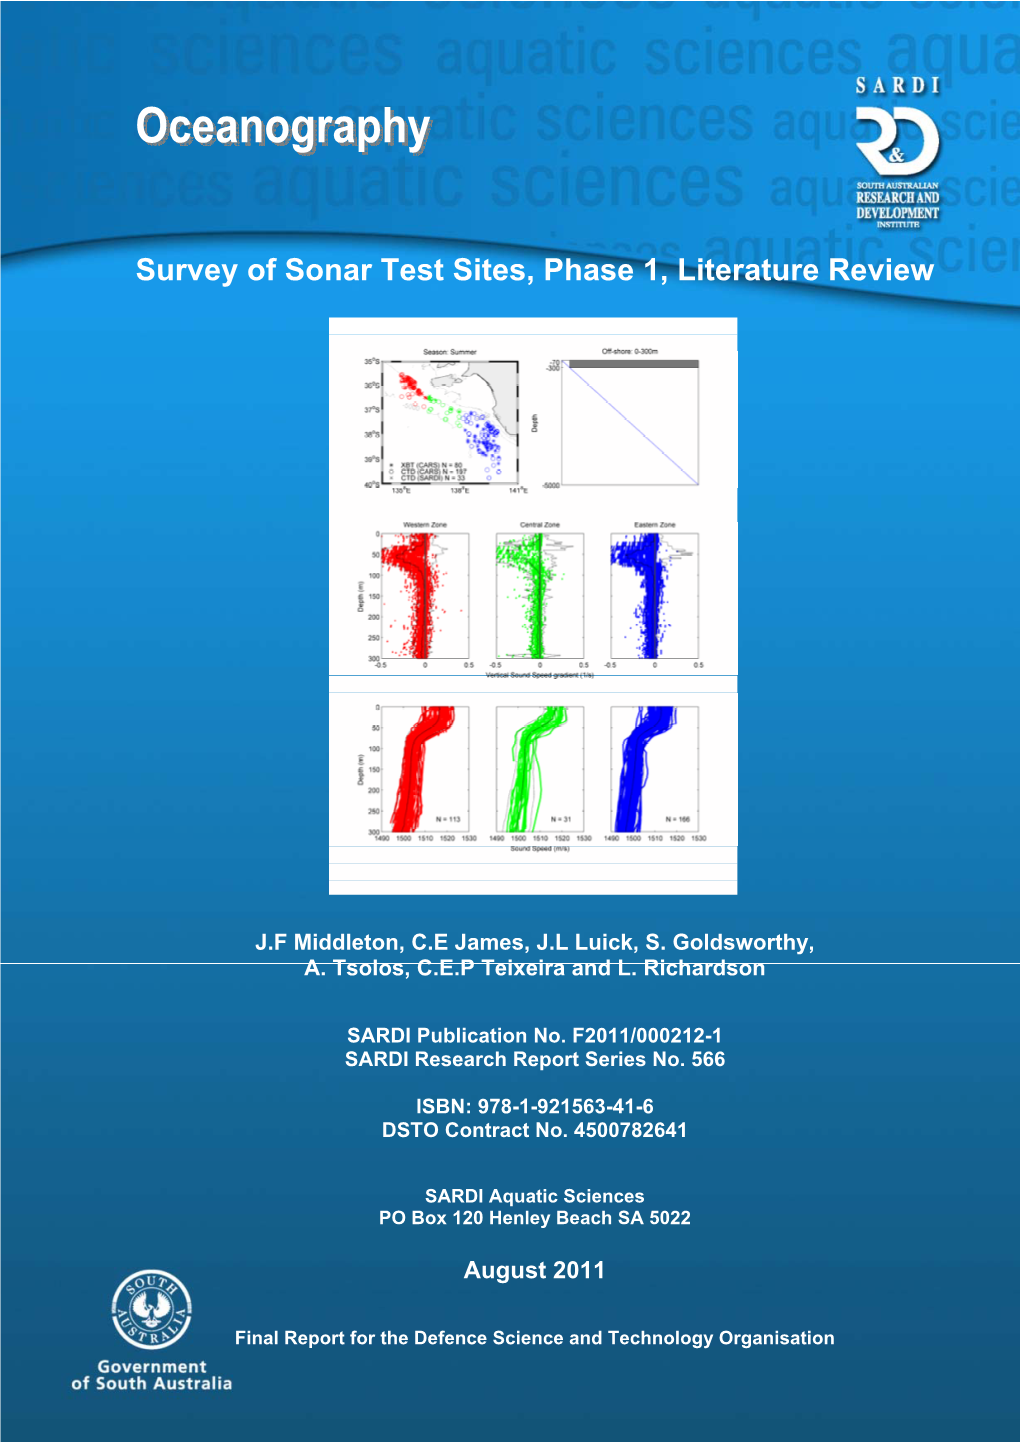 Survey of Sonar Test Sites, Phase 1, Literature Review